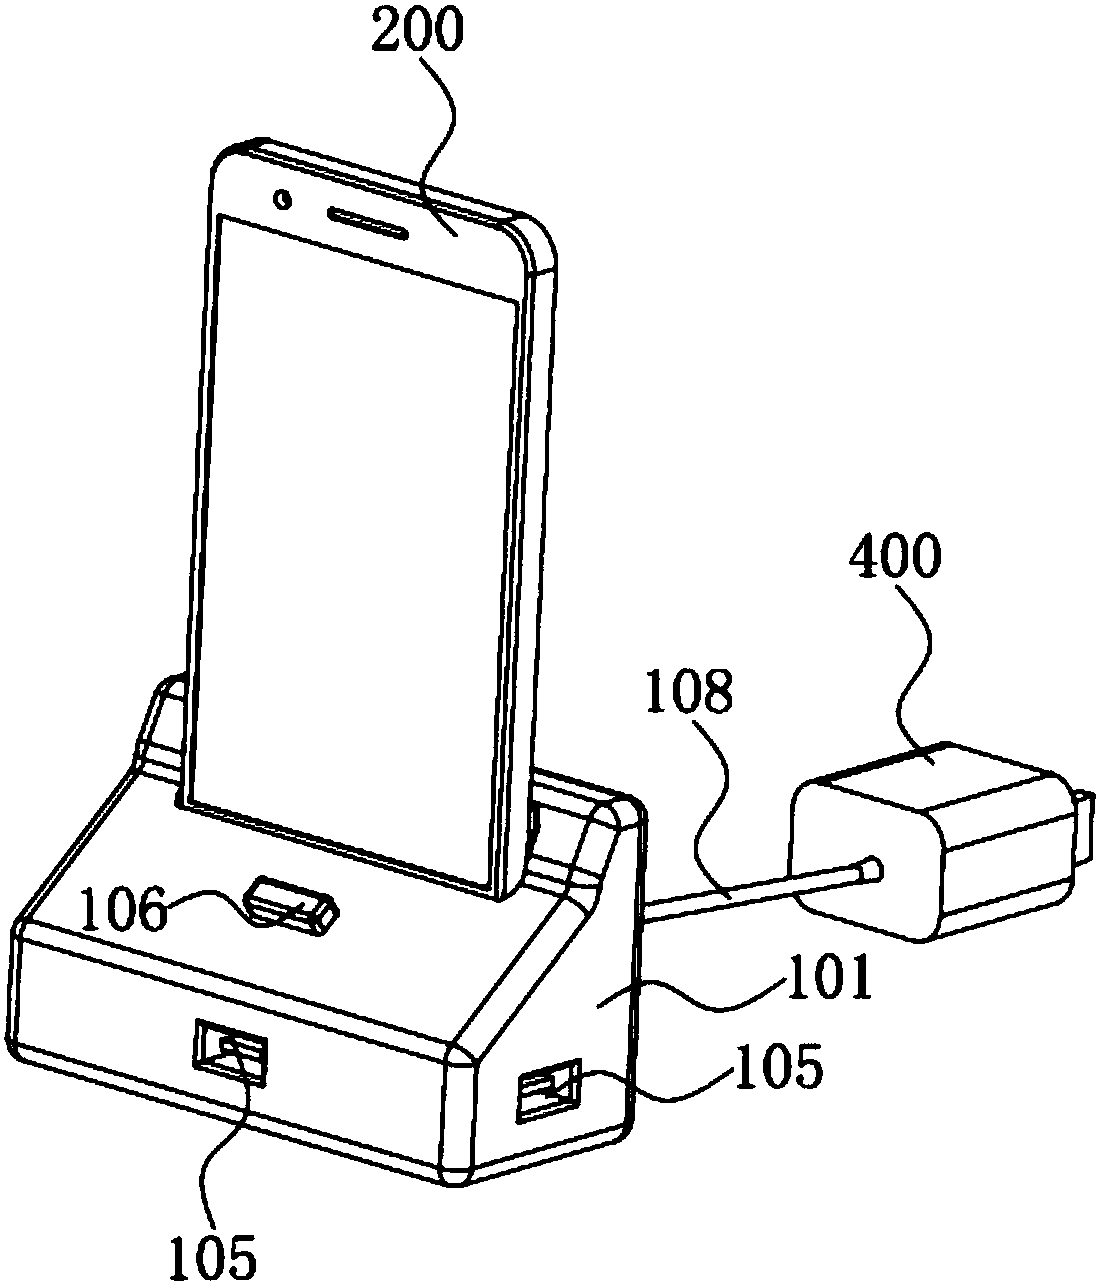 Mobile phone charge stand device